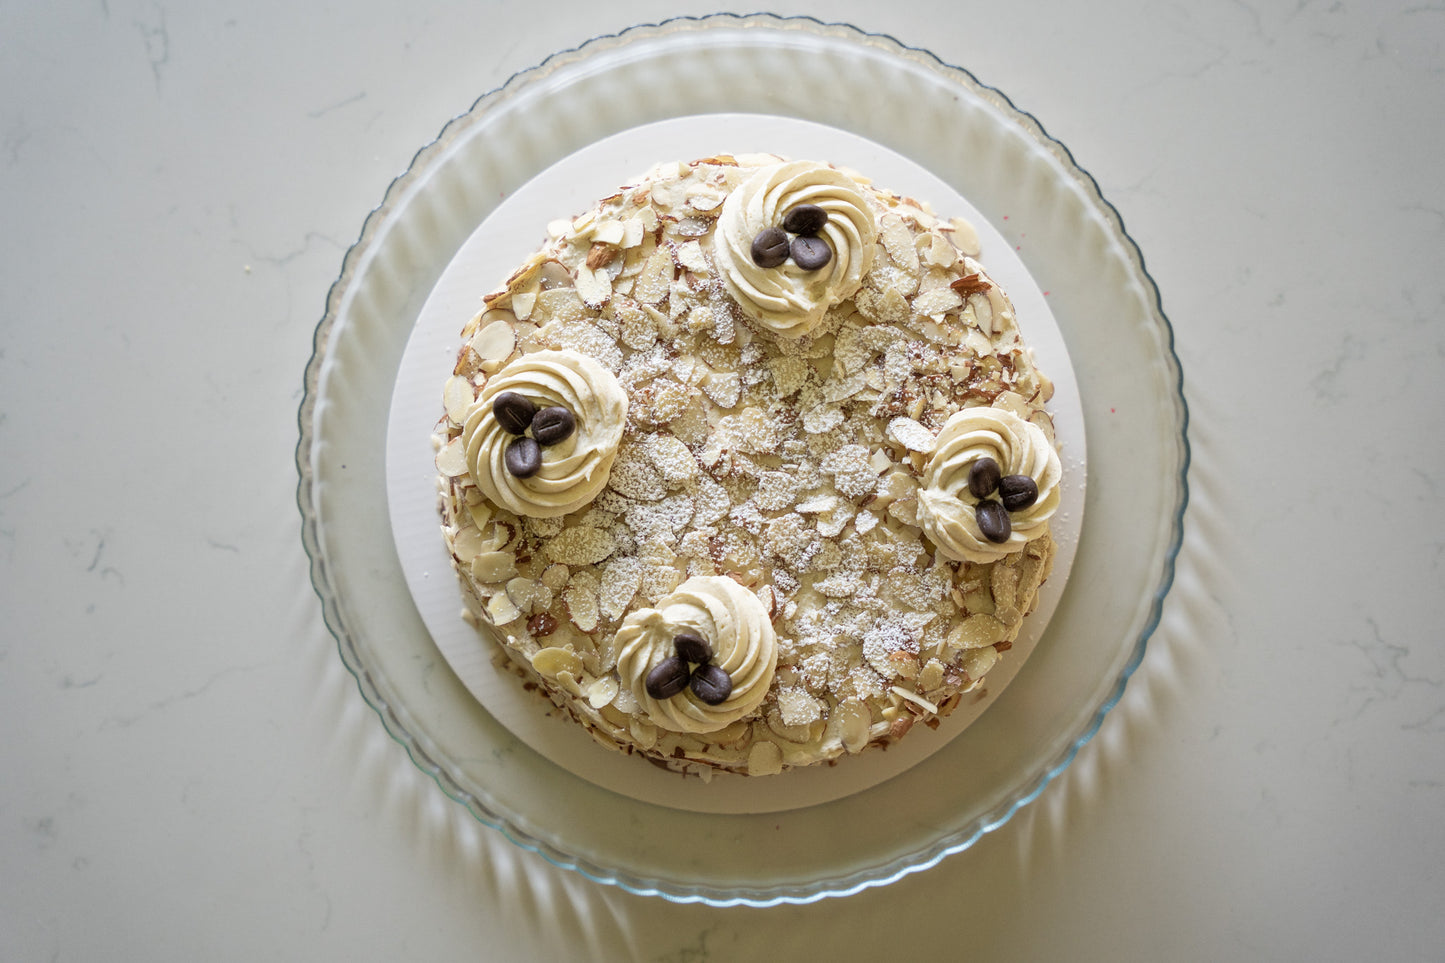 Gluten-Free Agnes Cake, 8 inch, Contains nuts